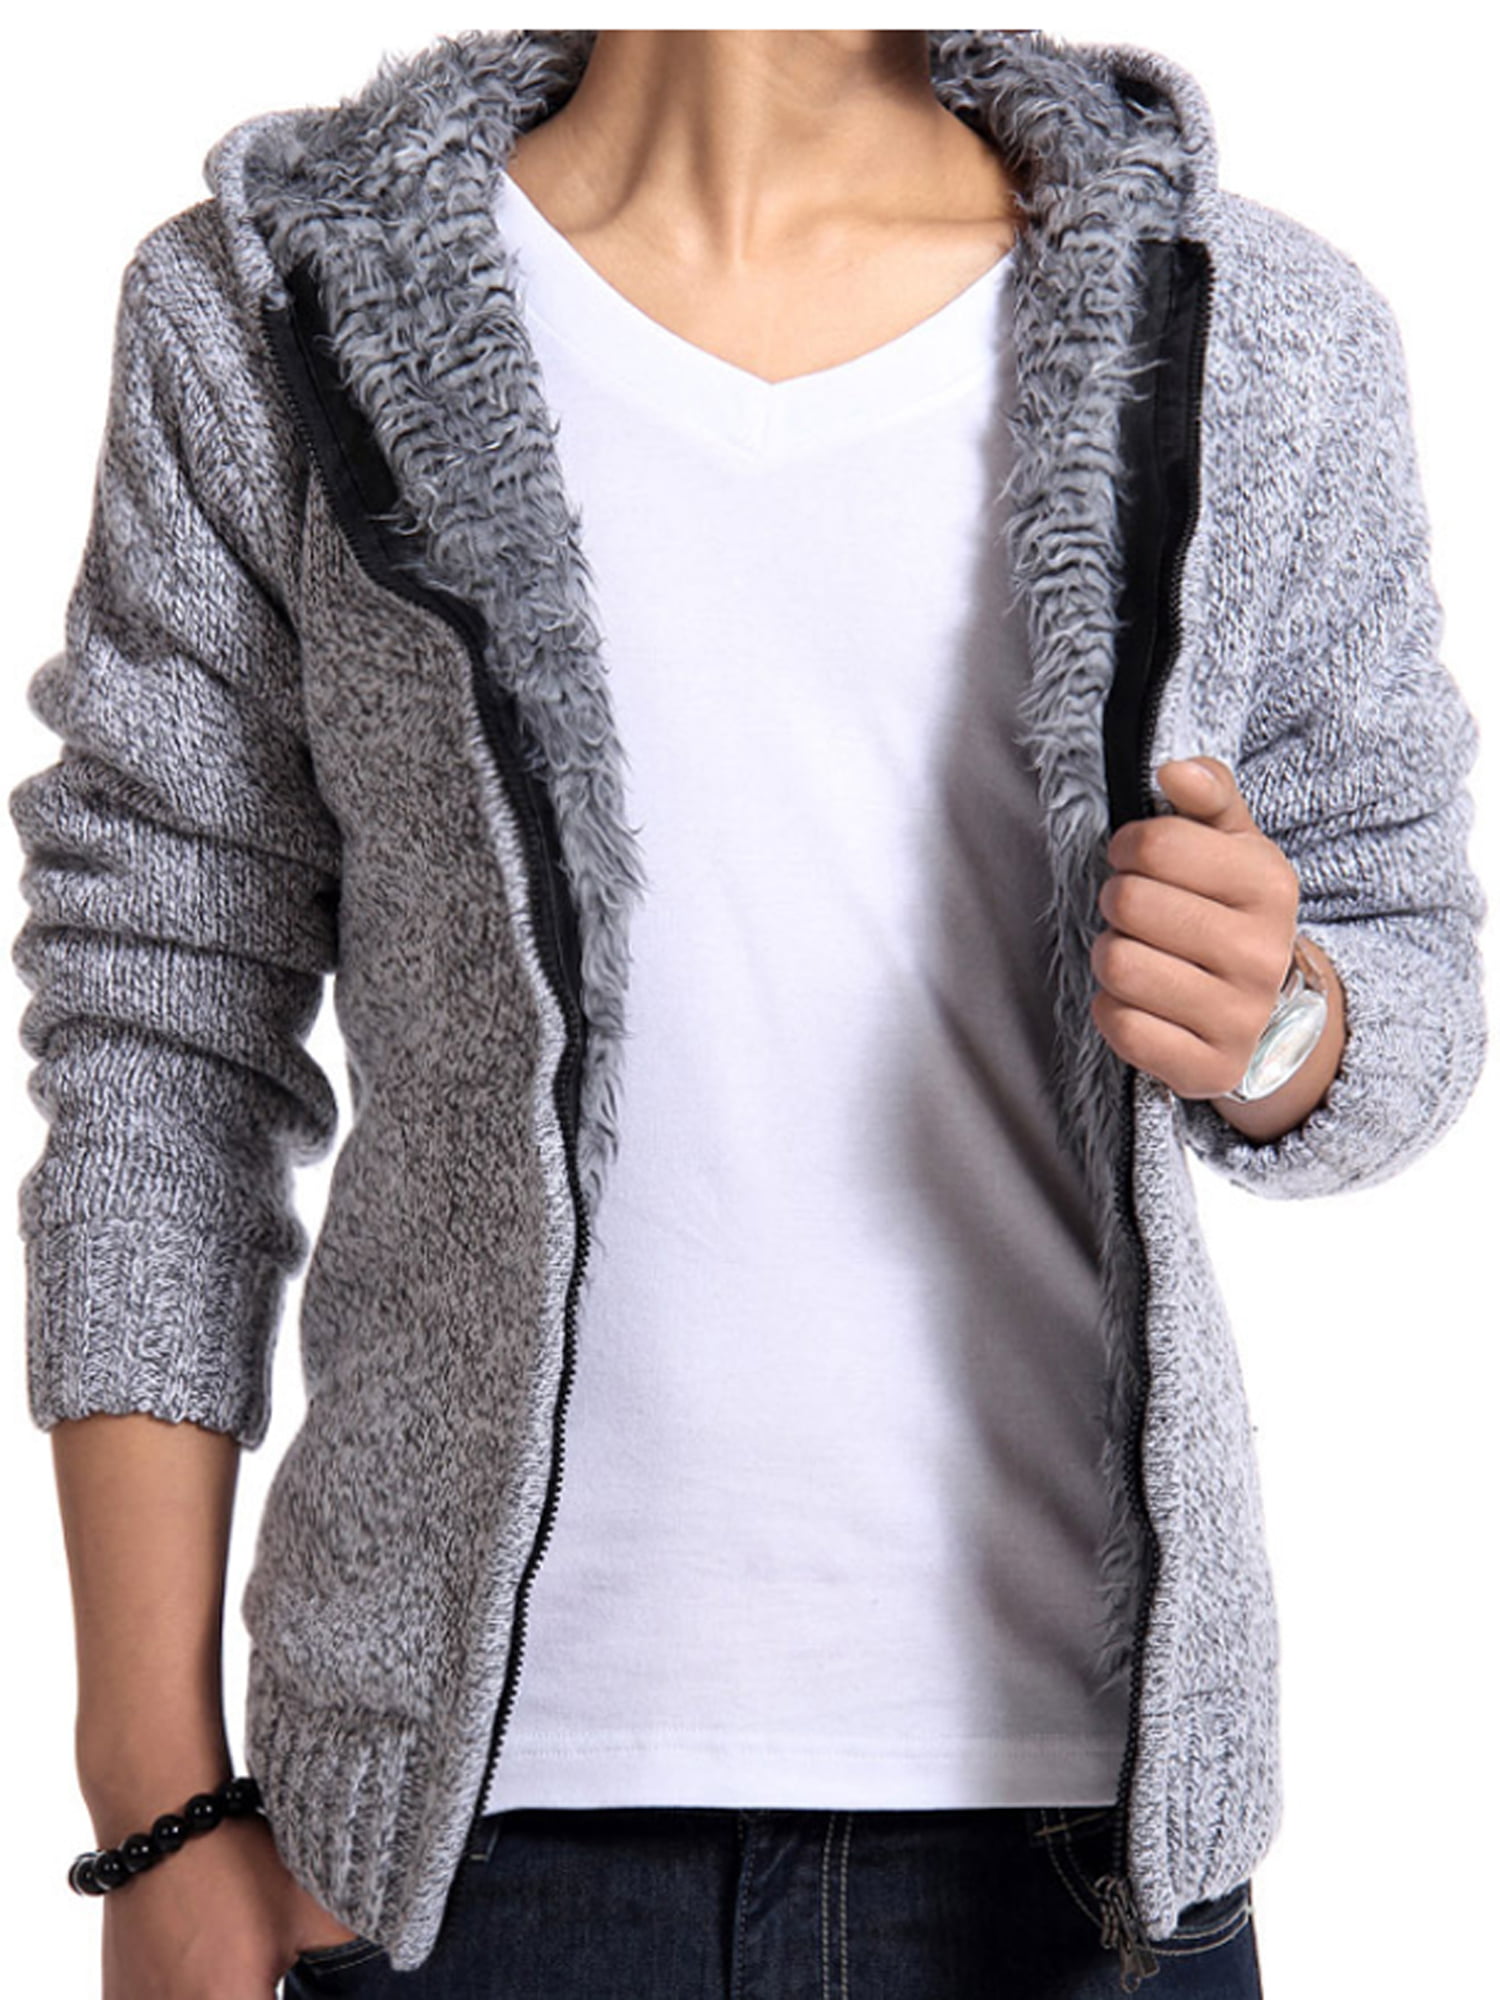 Men Thicken Sweaters Knitting Jacket Hooded Fur lining Long sleeve Coat Casual#